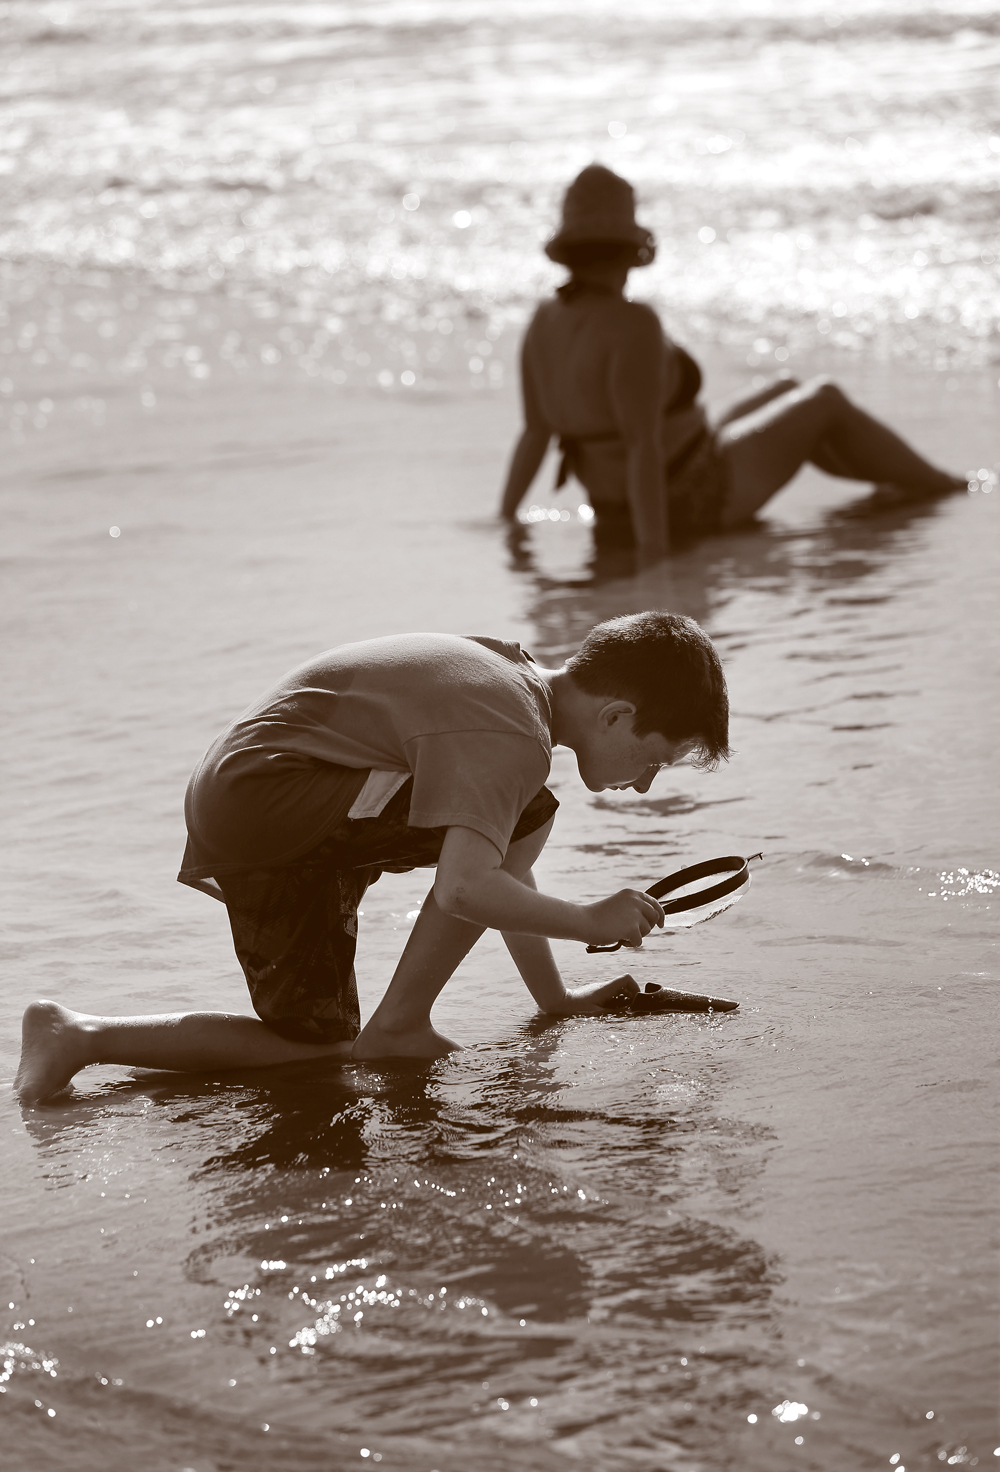 A young boy looks at the beach sand through a magnifying glass.